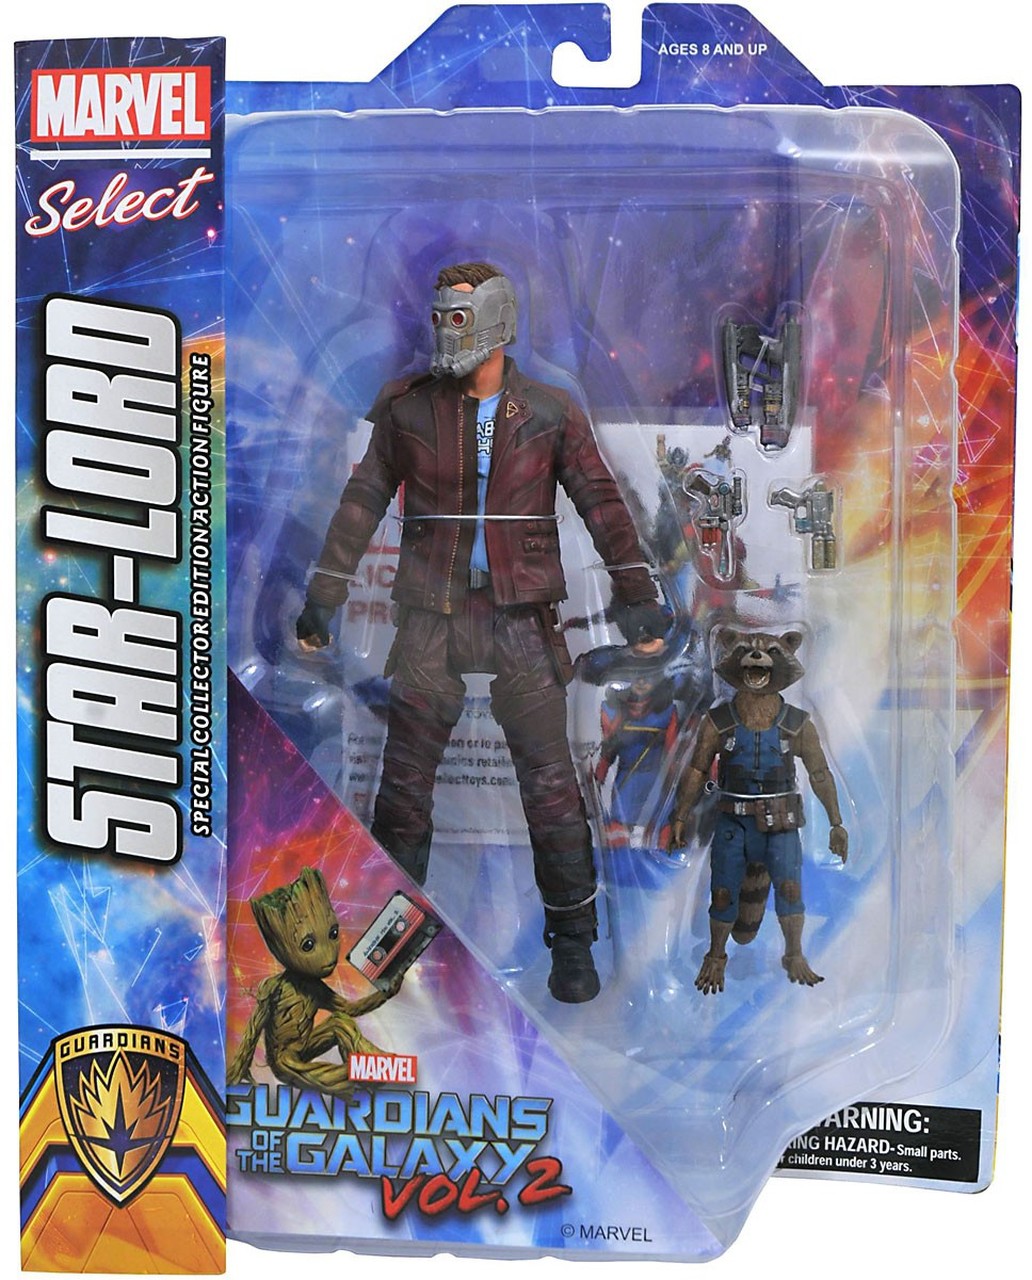 Marvel Select Guardians Star-Lord & Rocket Action Figure